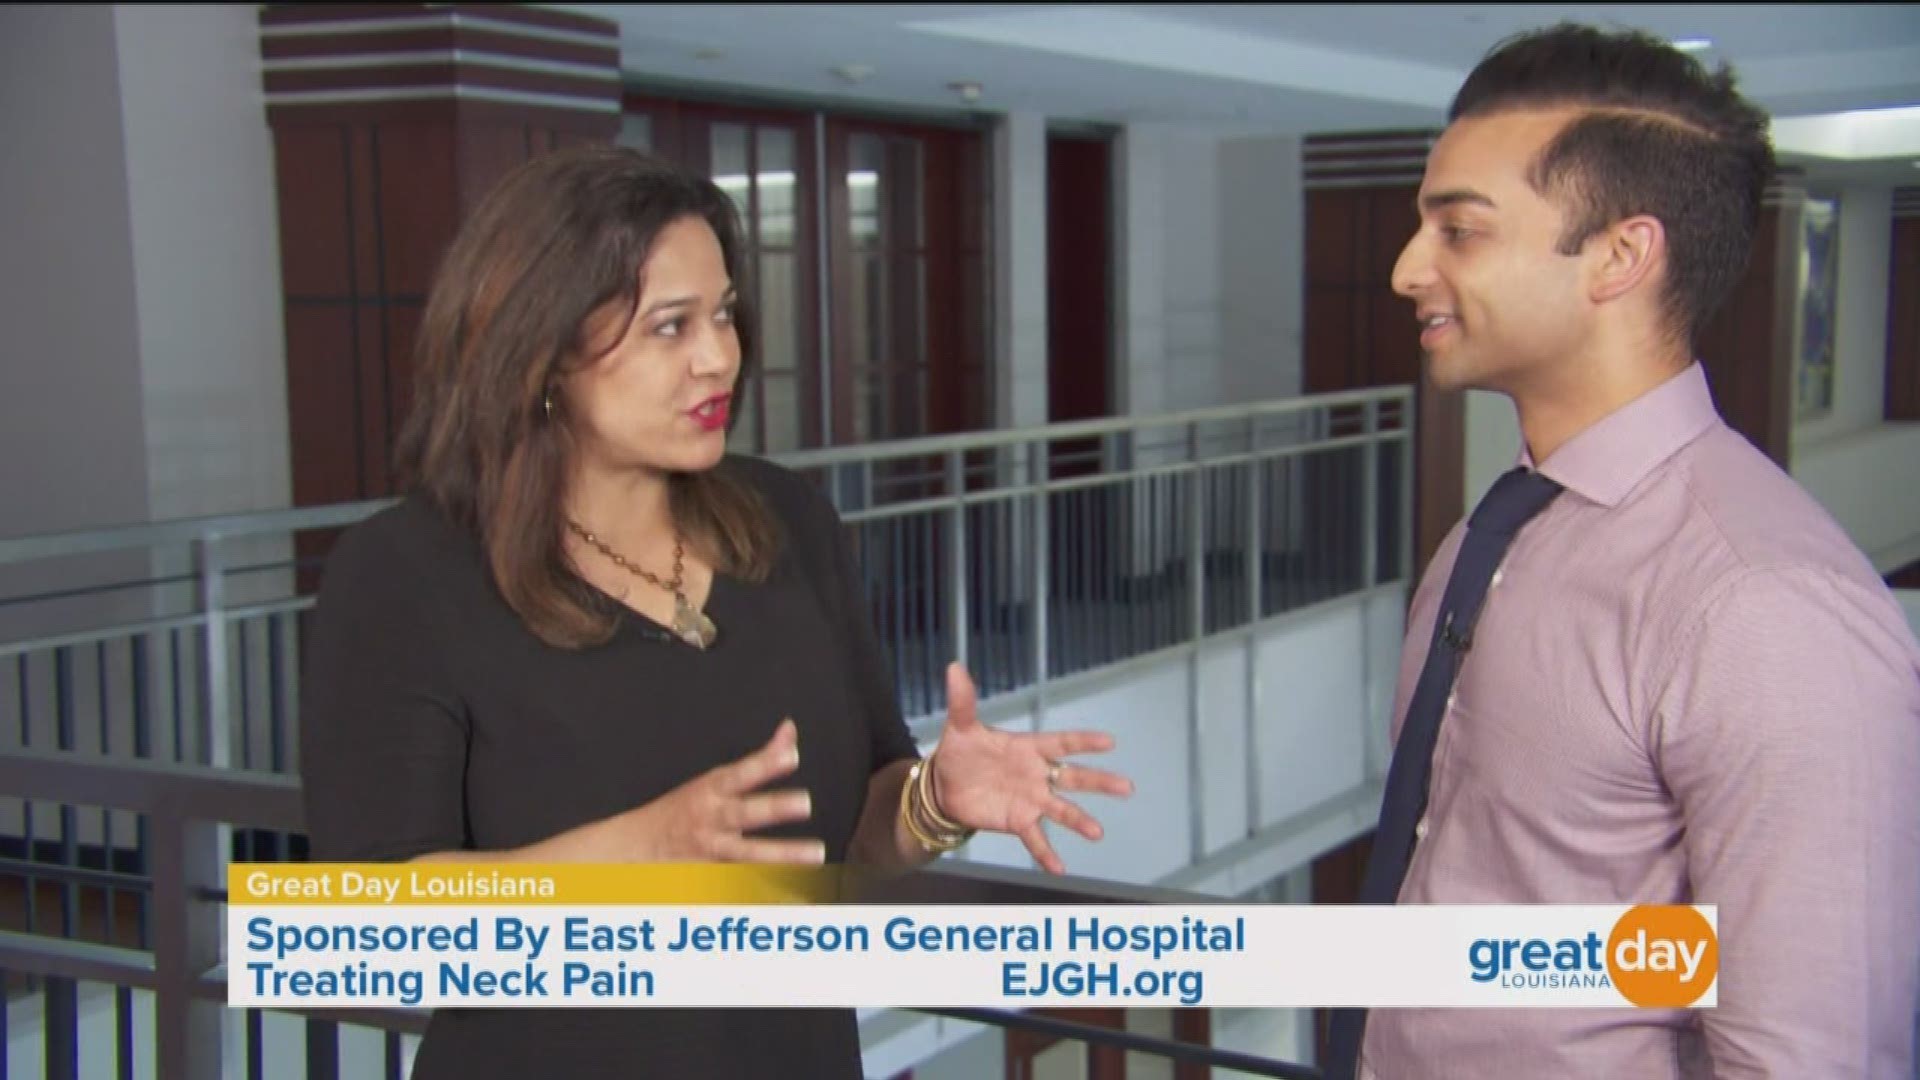 Camille Whitworth, Host of East Jefferson General Hospital's Medical Moment, visits with Dr. Abhishek Kumar to discuss the many aspects of treating neck pain.